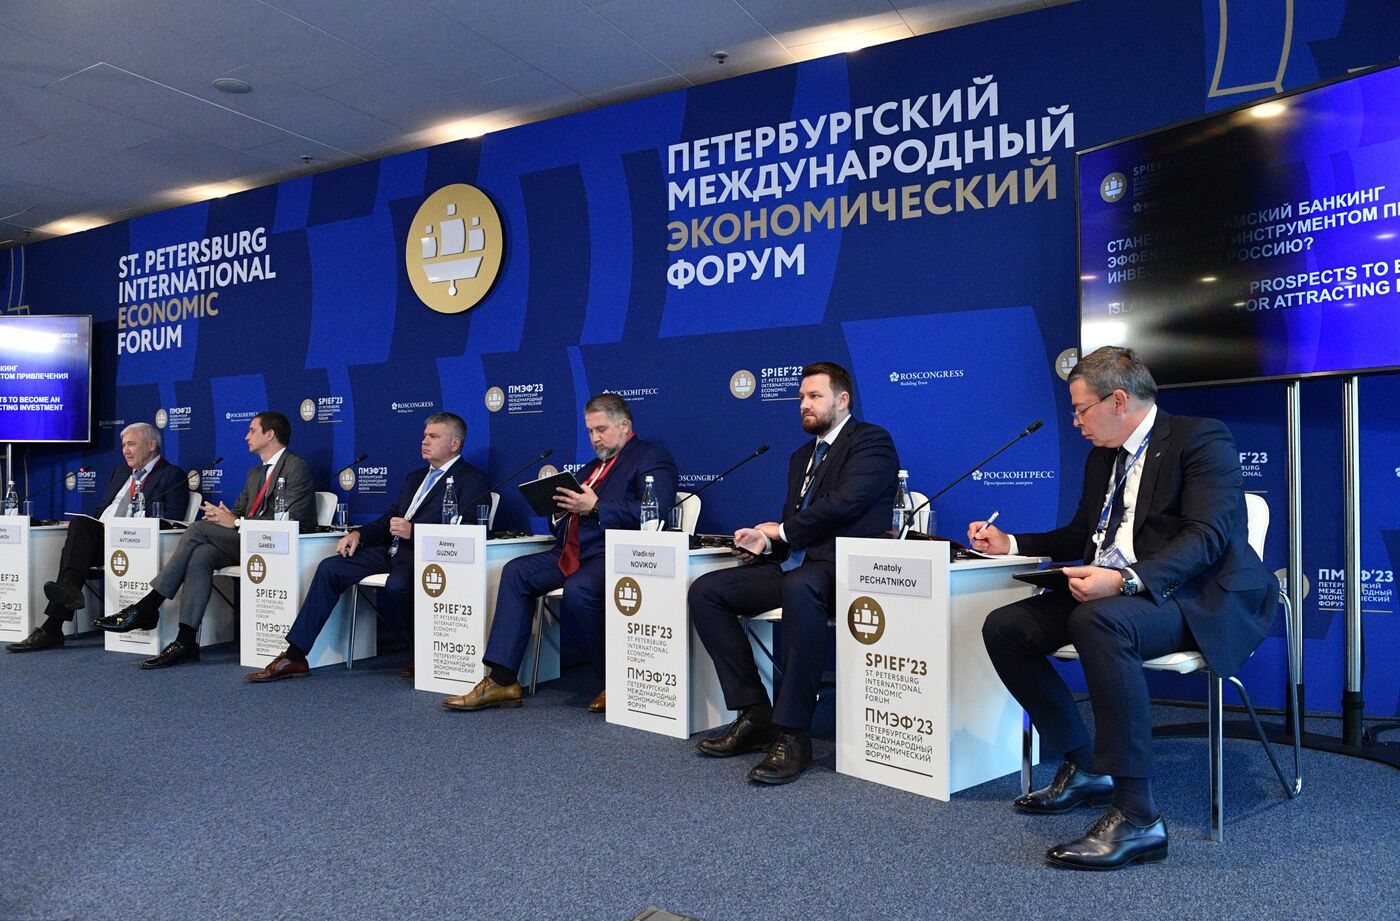 SPIEF-2023. Islamic Banking: Prospects to Become an Effective Tool for Attracting Investment to Russia